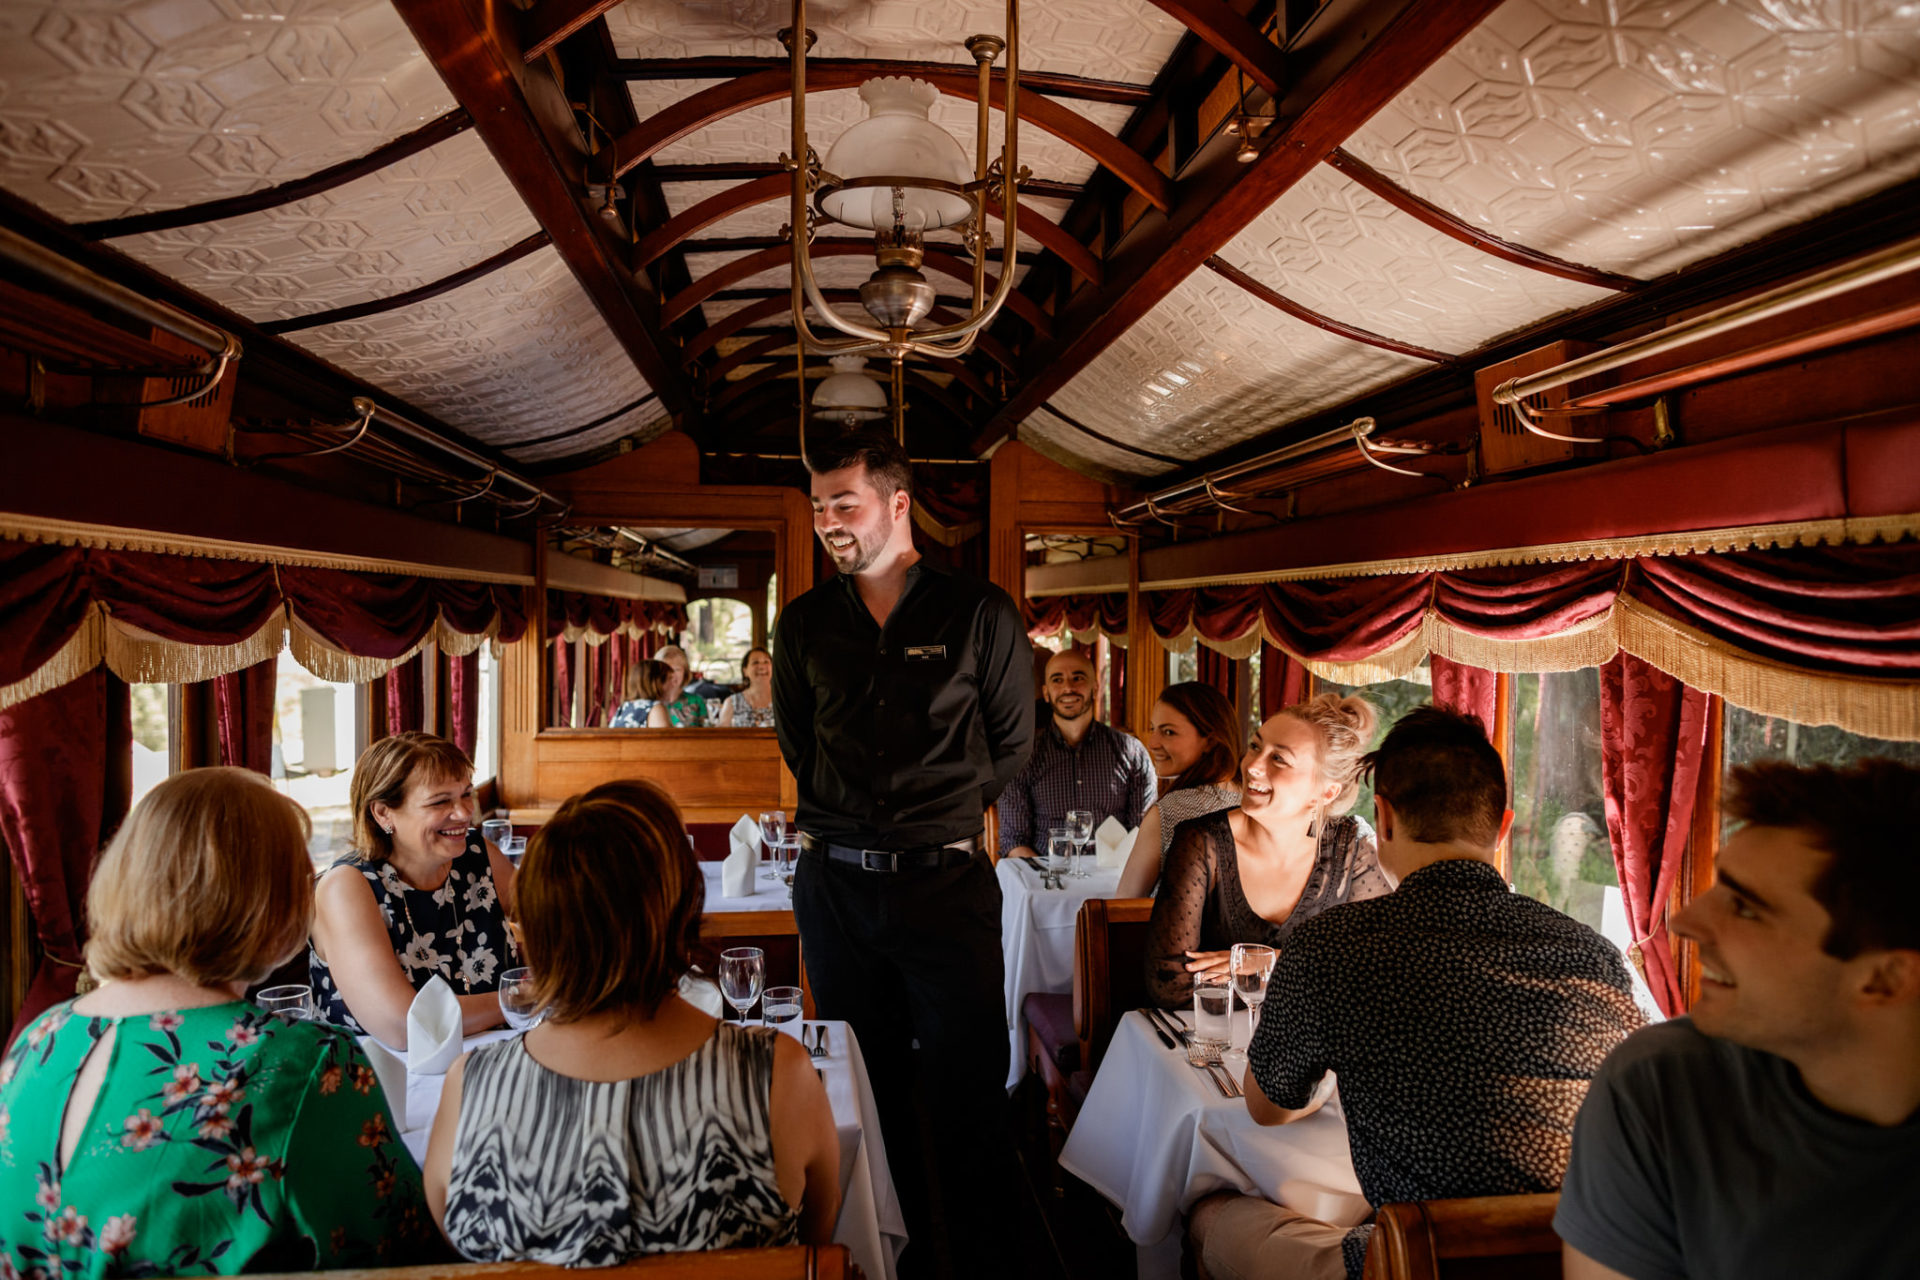 Server Talking To Guests On Board Dining Carriage